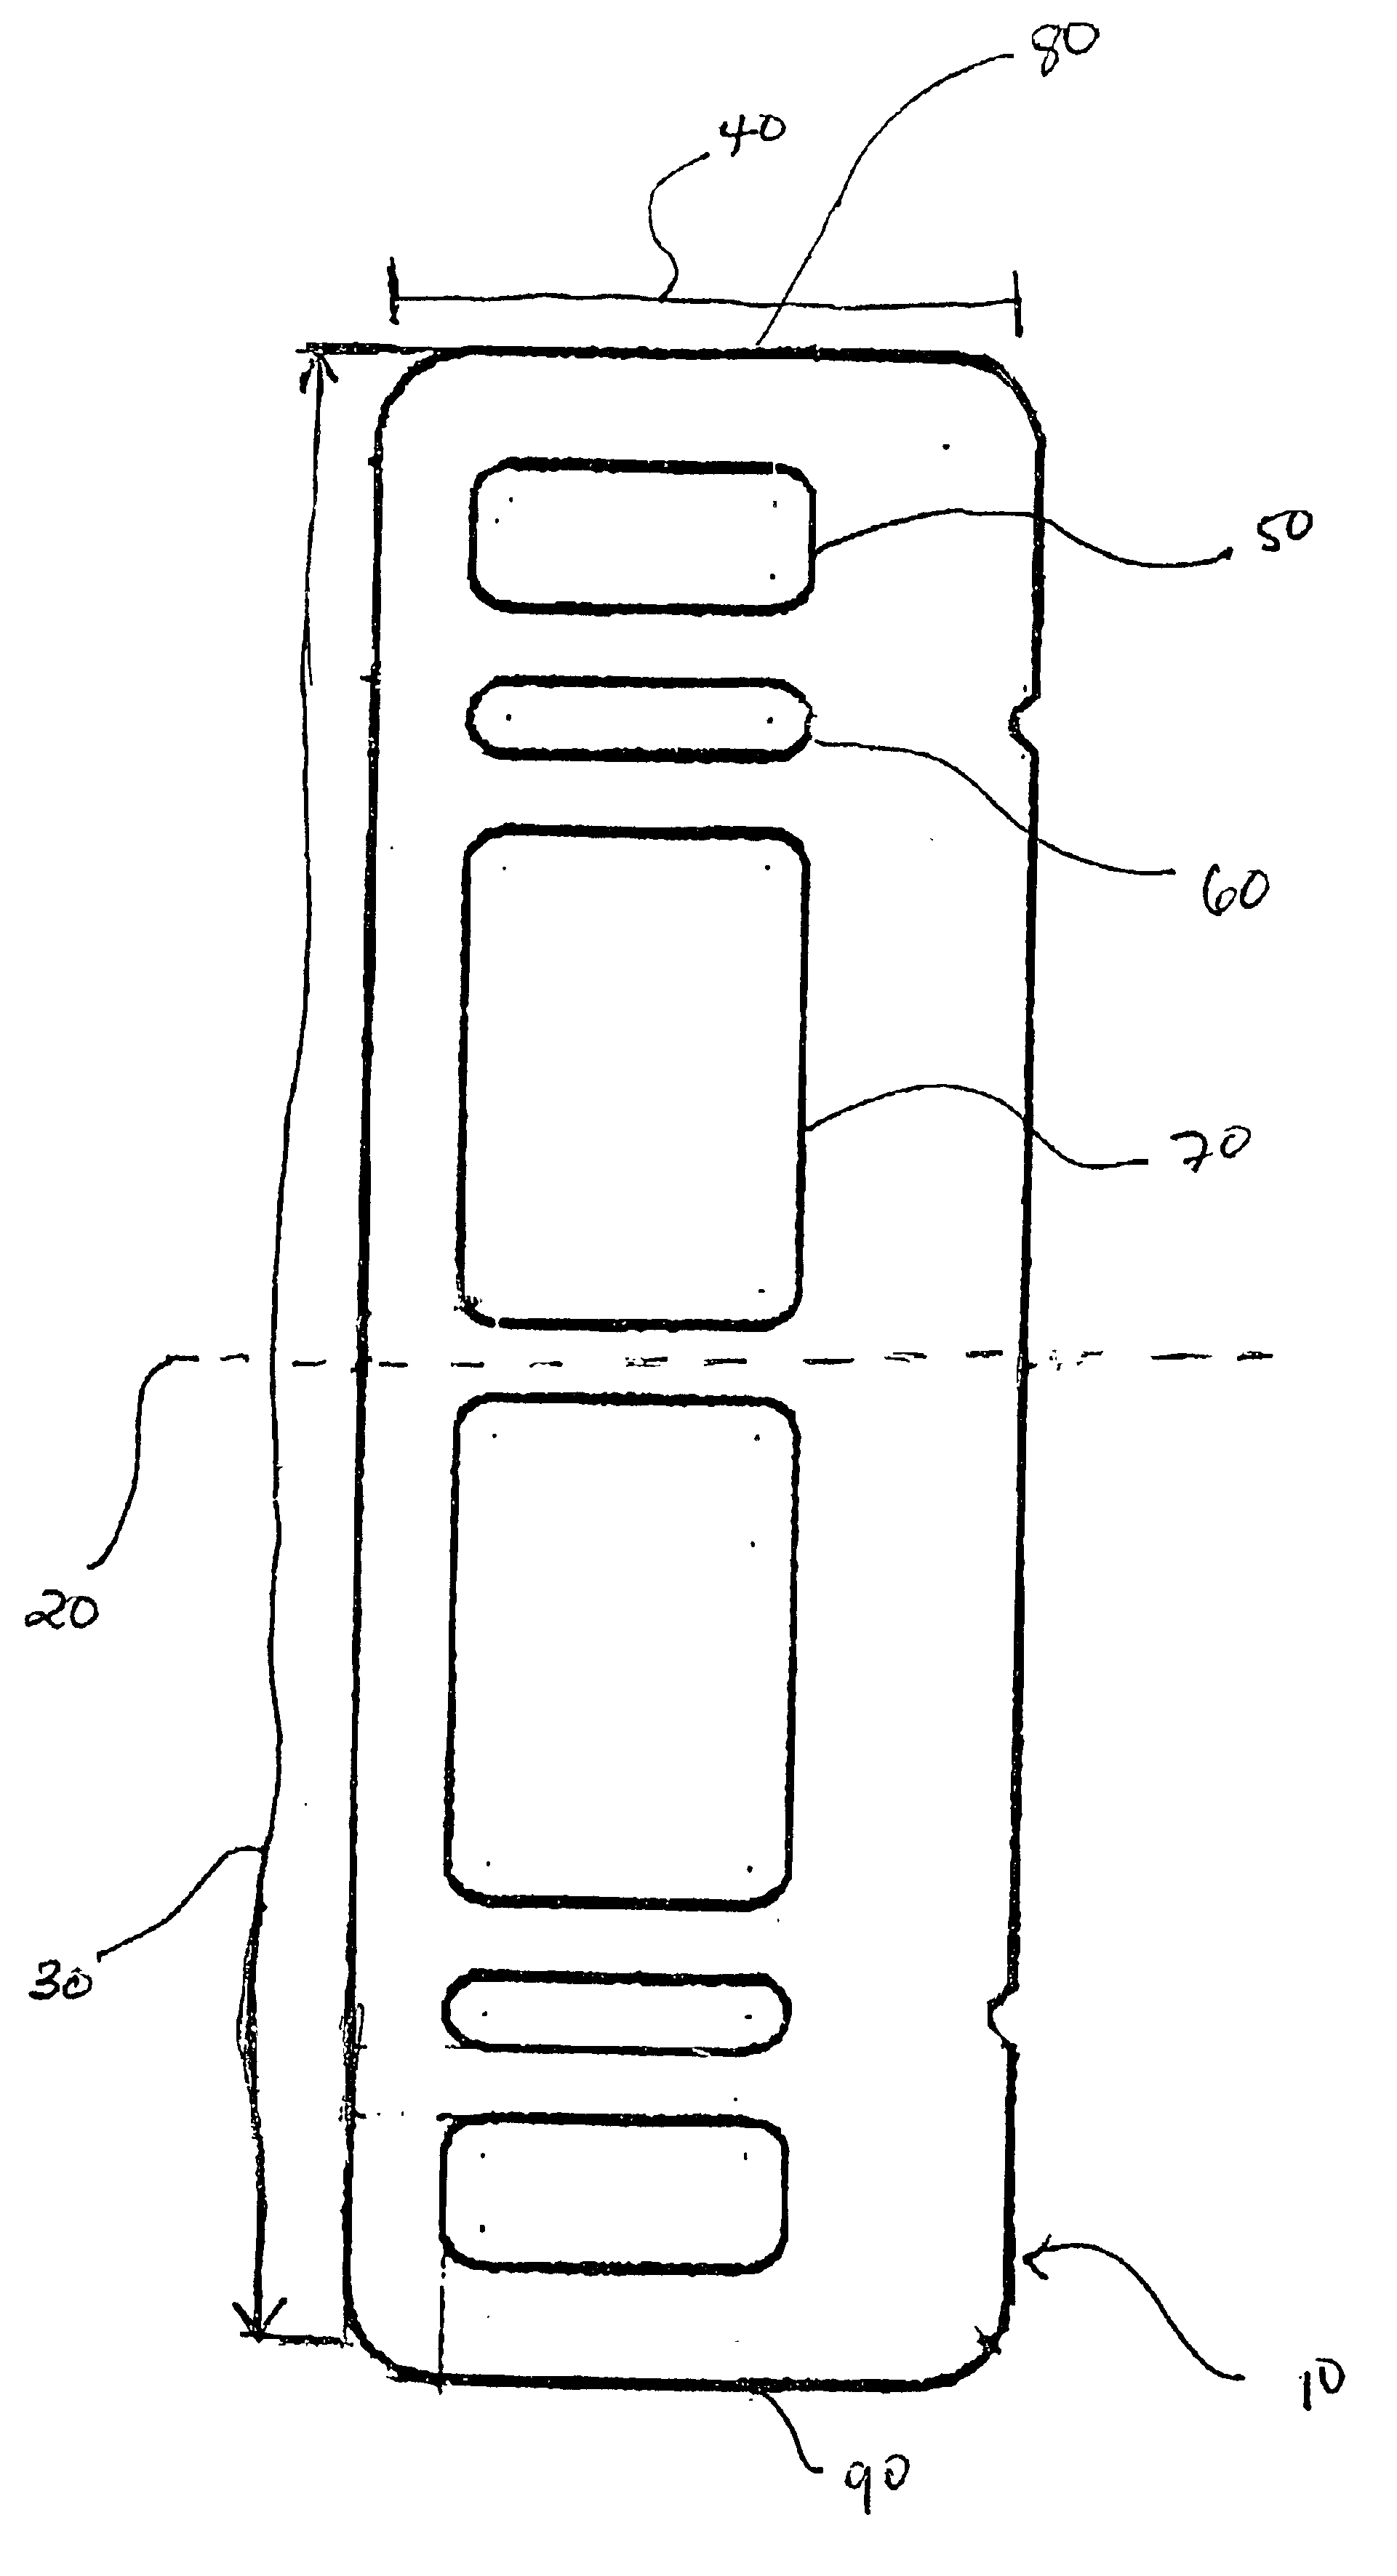 Composite materials, articles of manufacture produced therefrom, and methods for their manufacture